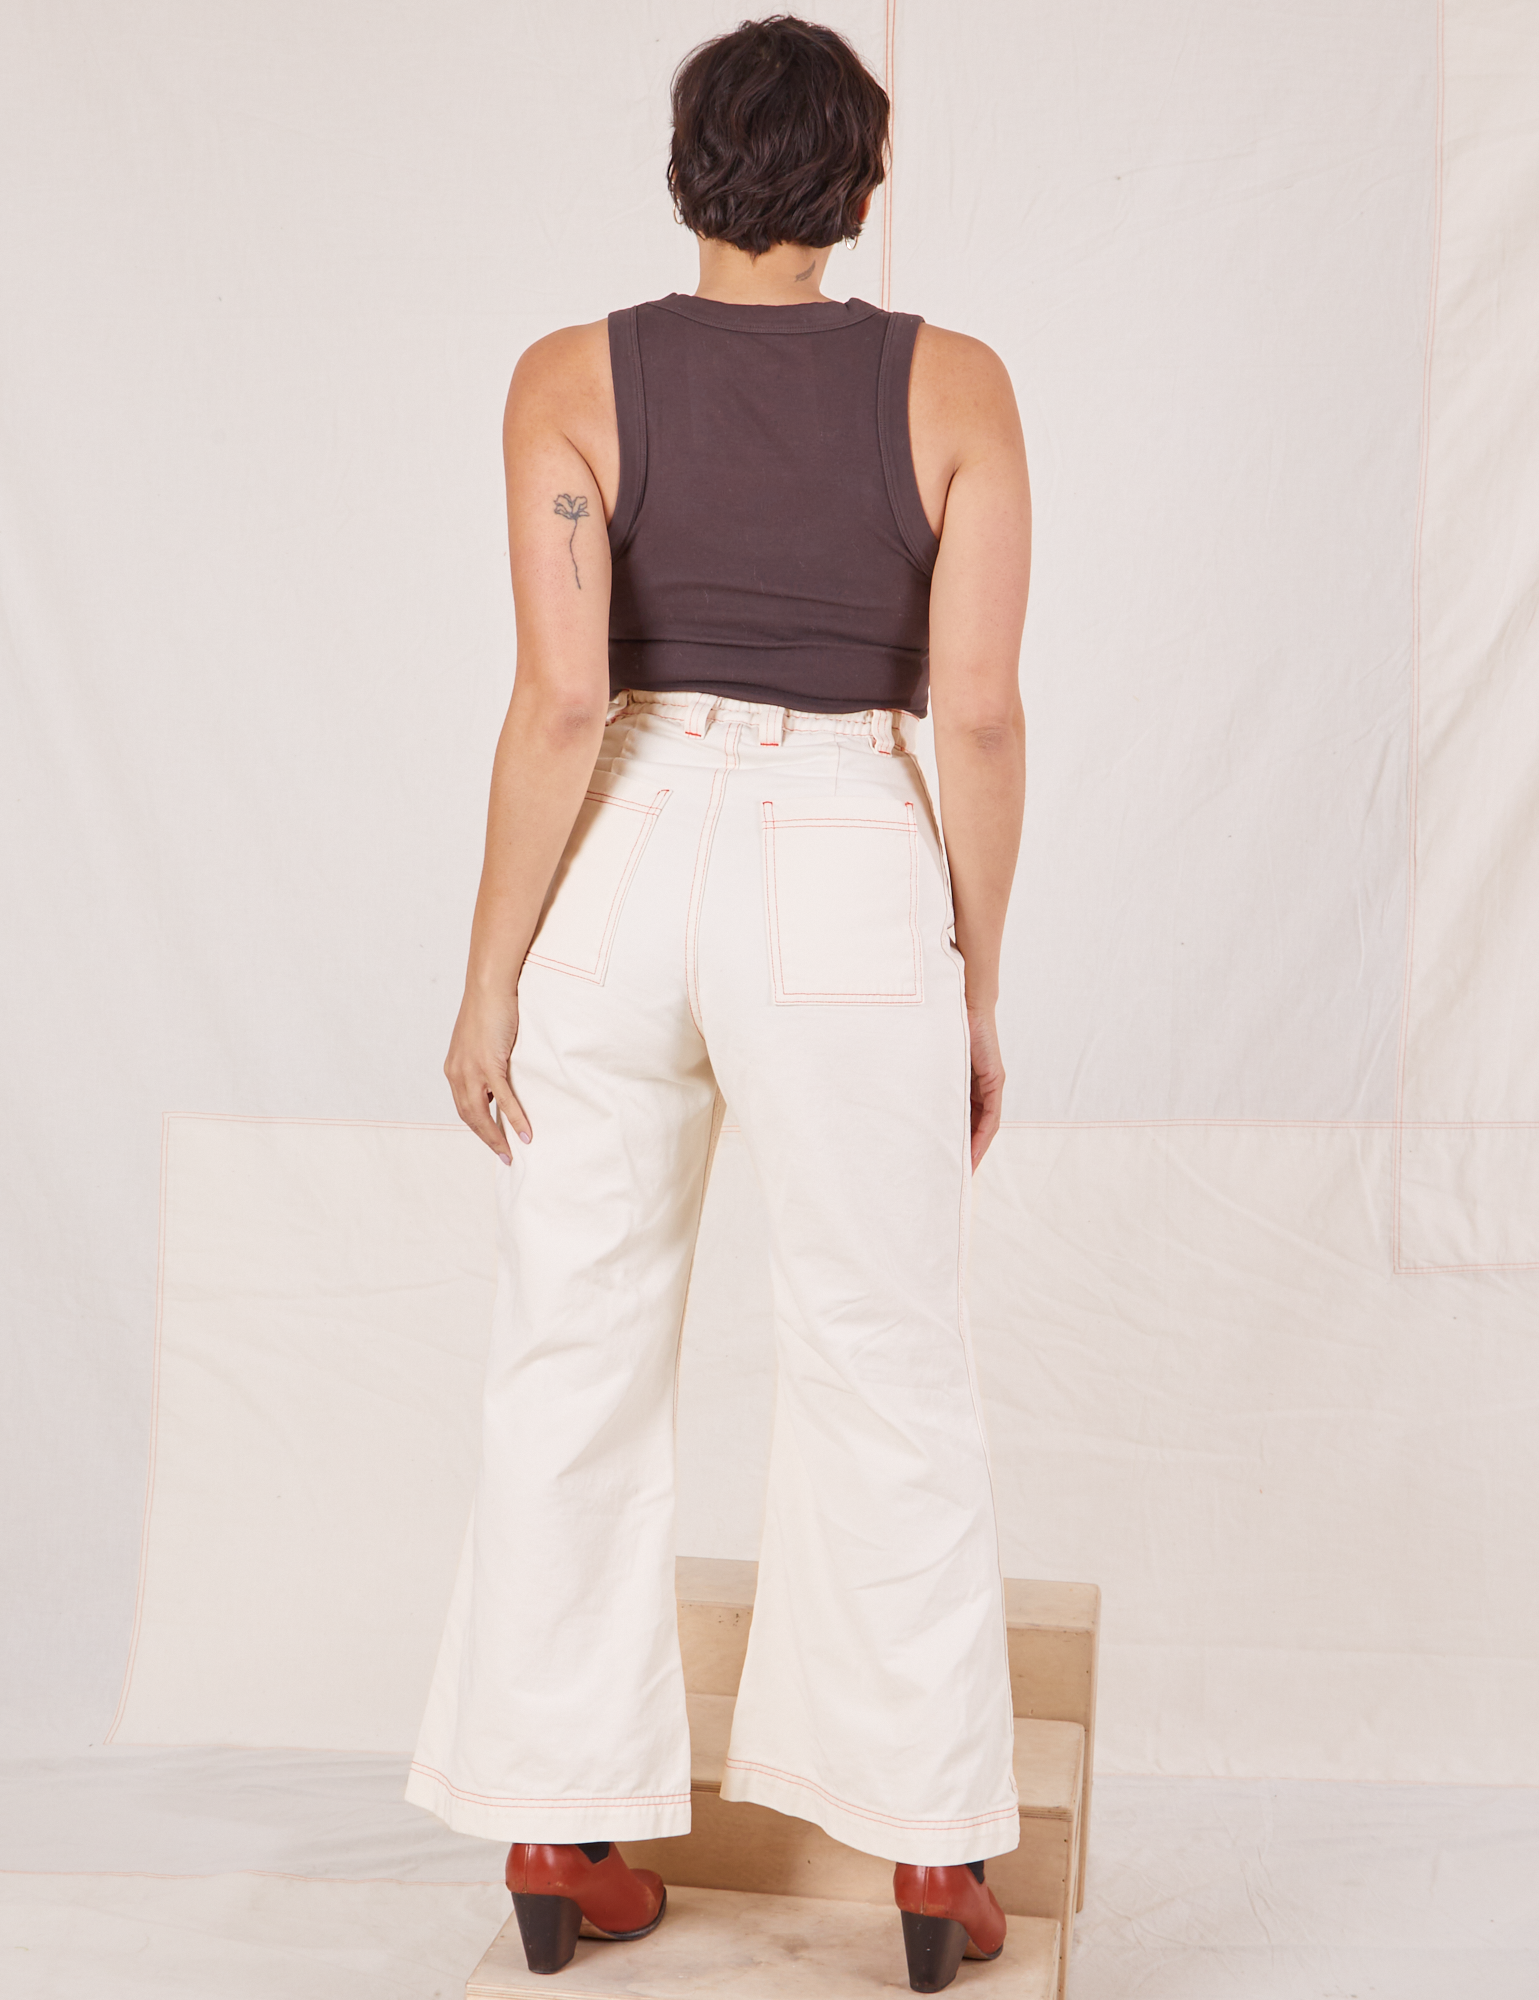 Back view of Bell Bottoms in Vintage Tee Off-White and espresso brown Tank Top worn by Tiara